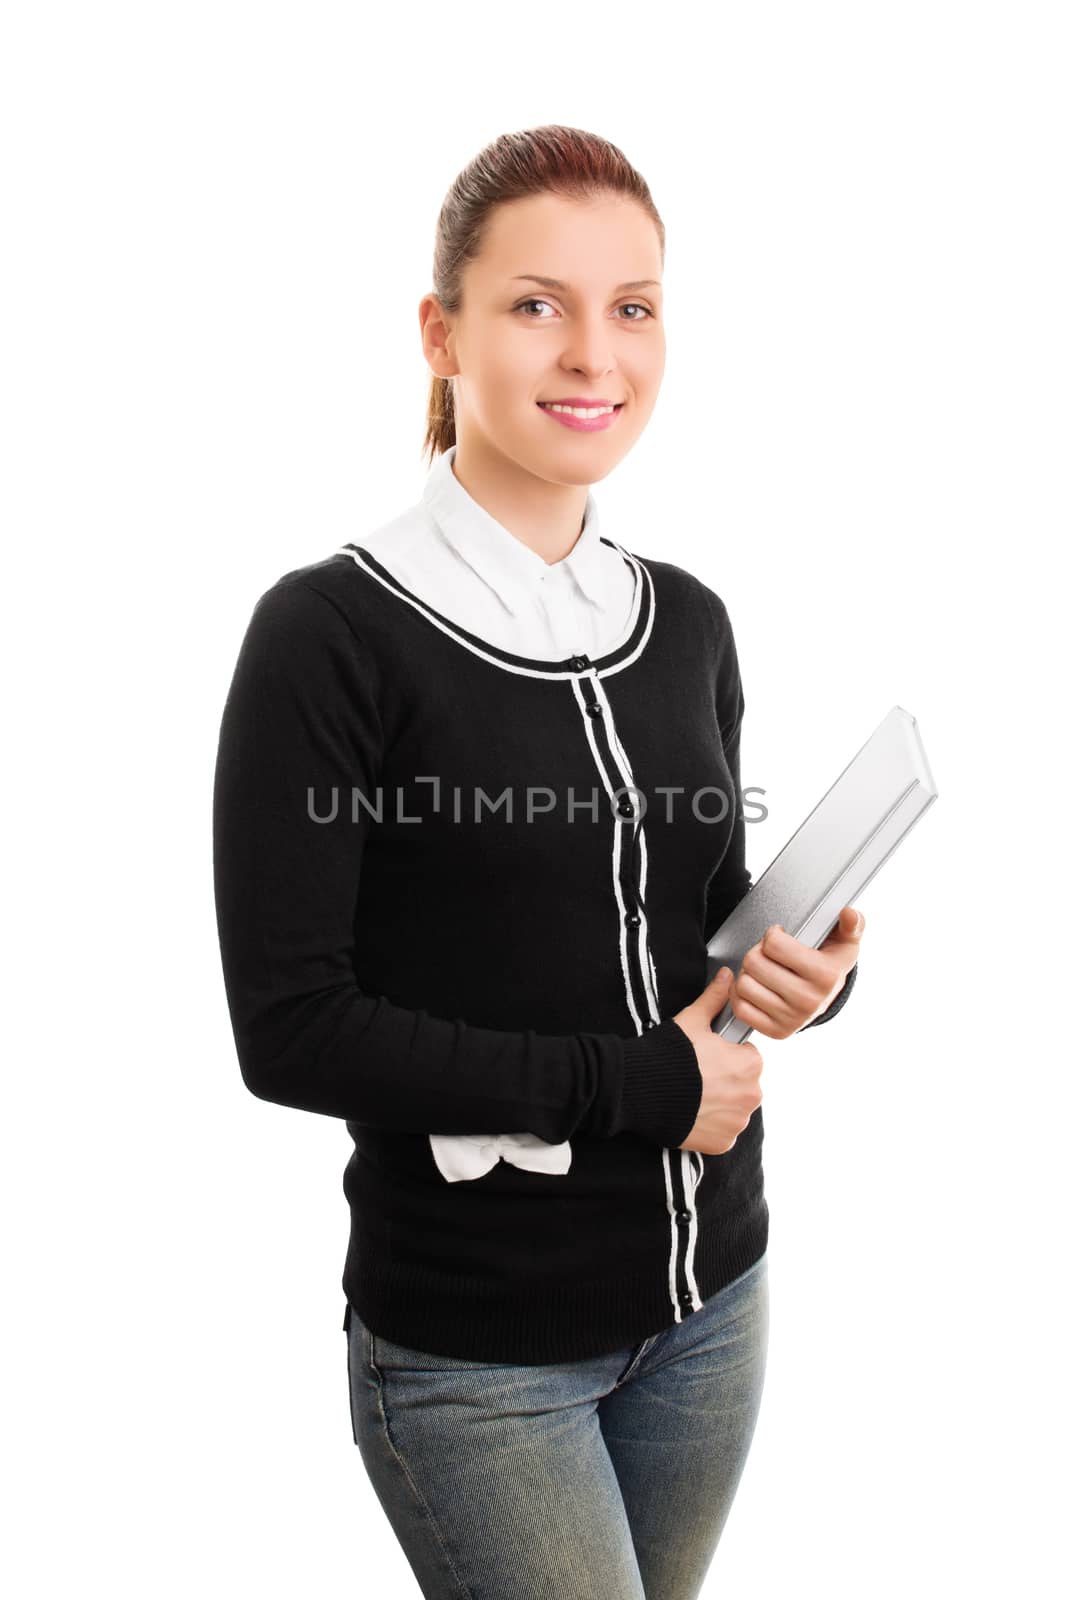 Portrait of a female student in uniform holding some books, isolated on white background.